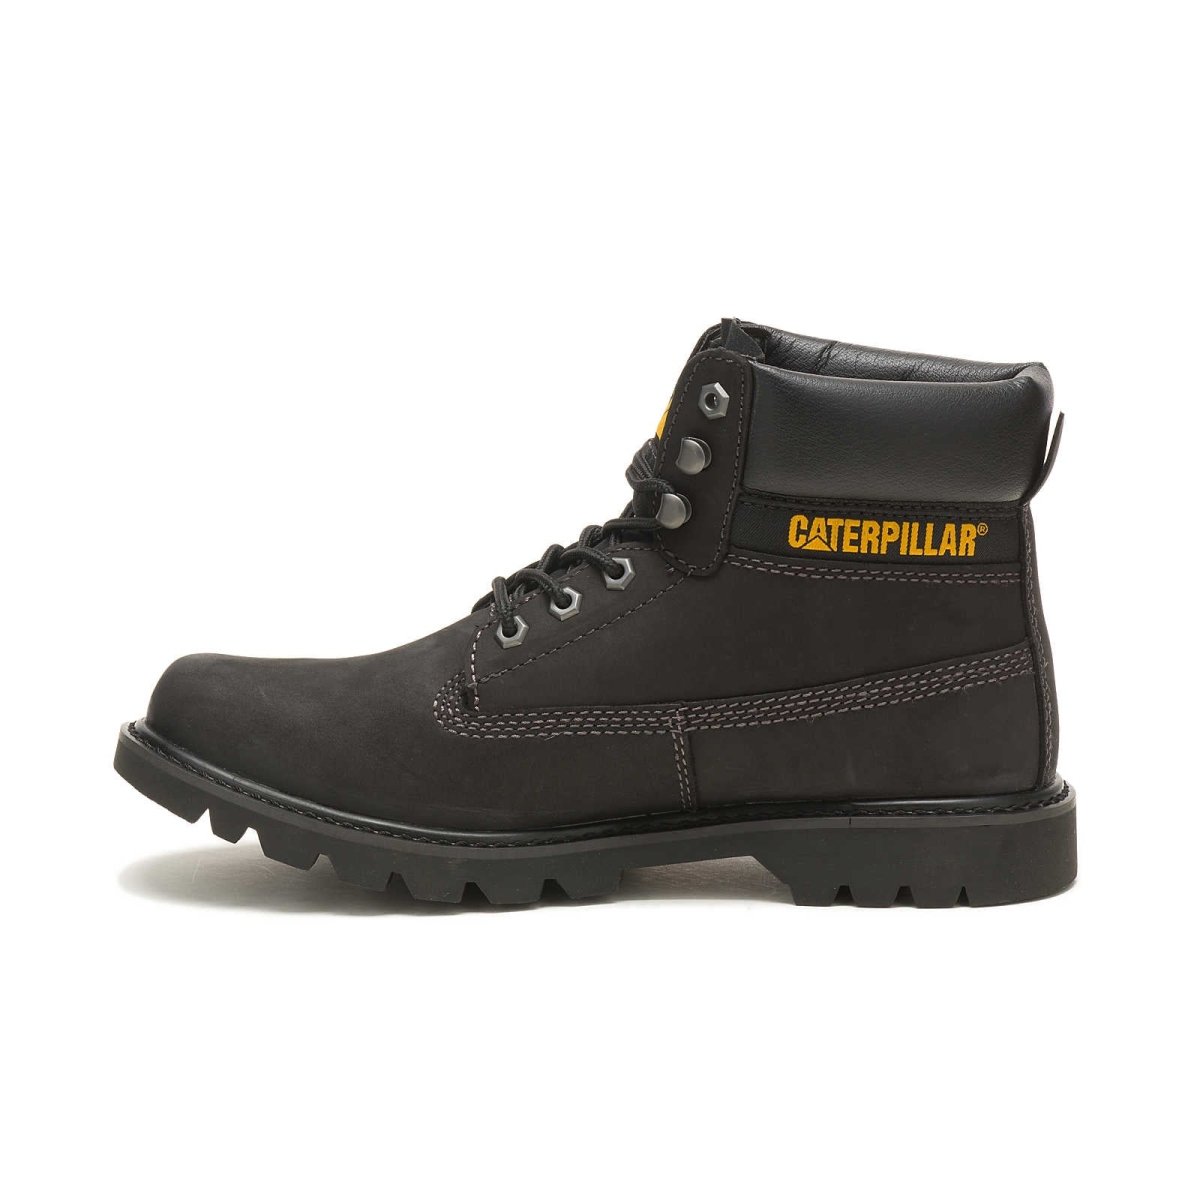 CATERPILLAR COLORADO 2.0 UNISEX (P110425) BOOT IN BLACK - TLW Shoes